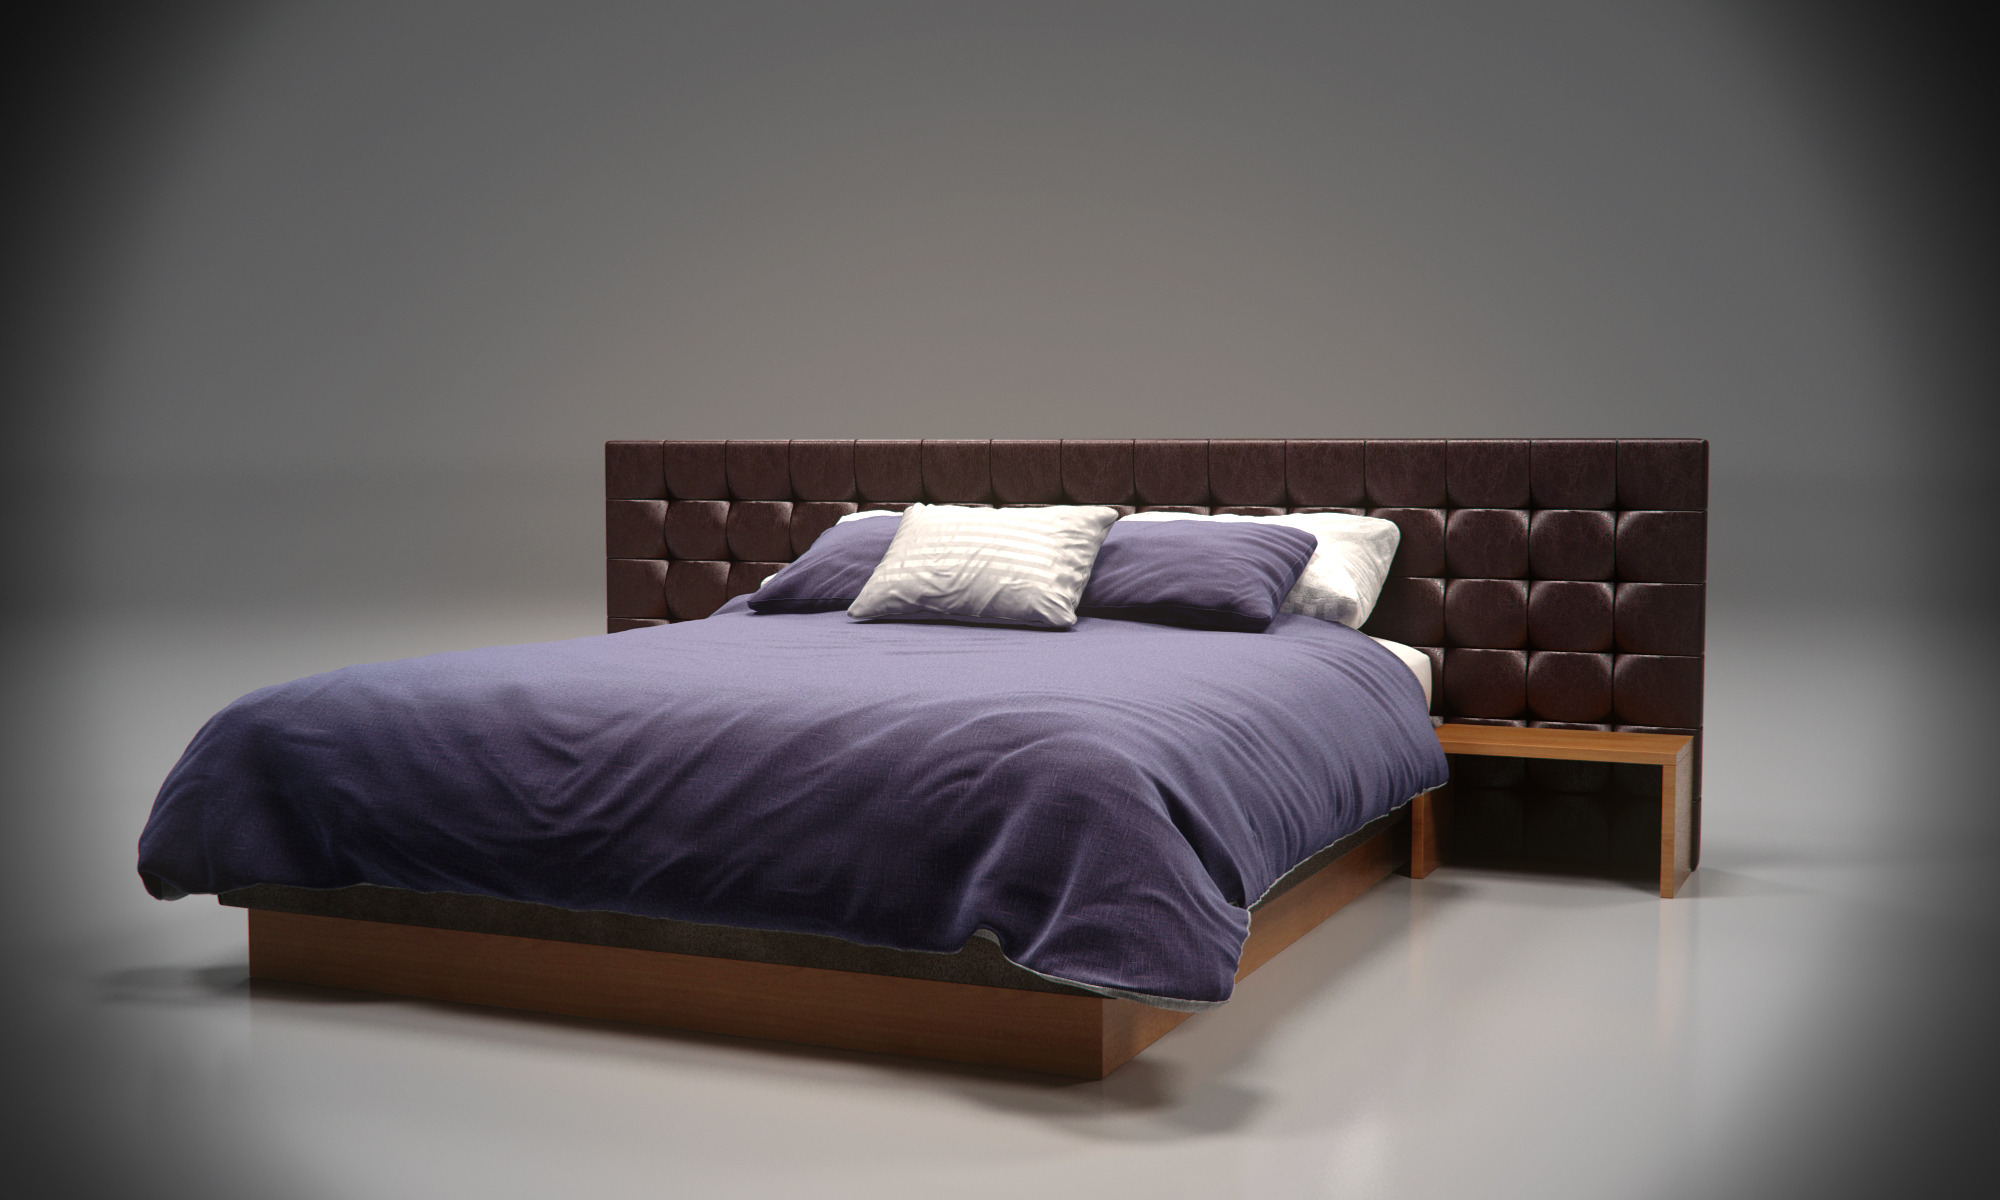 3ds Max Bed Model